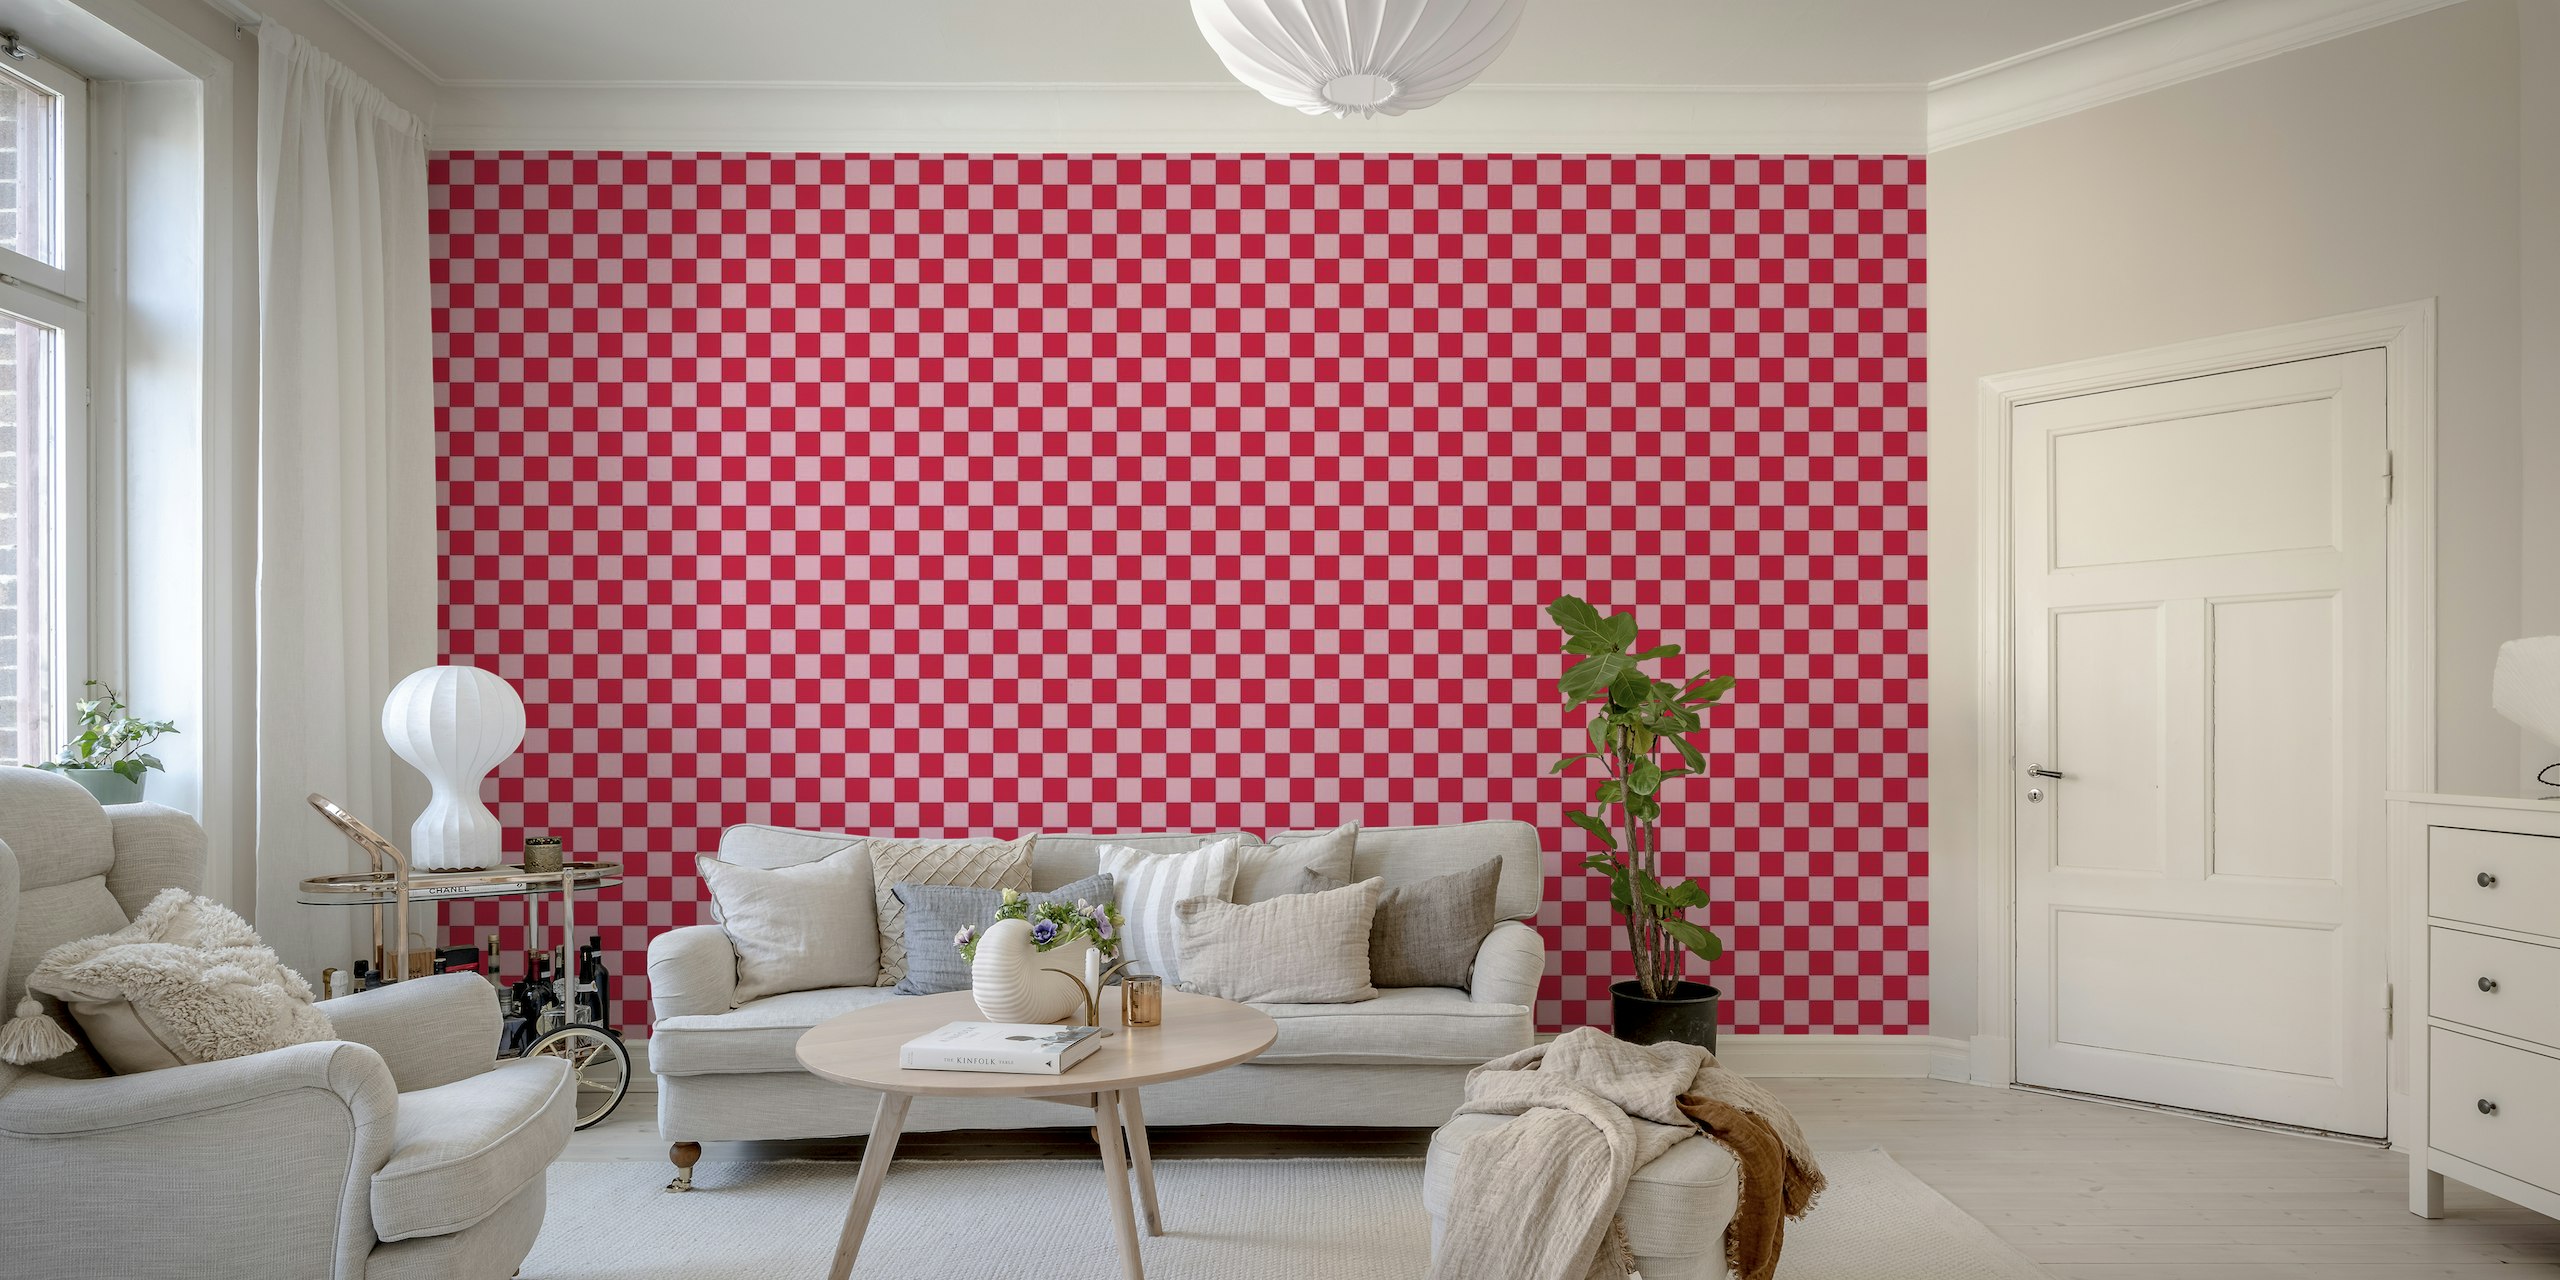 Checkerboard - Pink and Red tapete